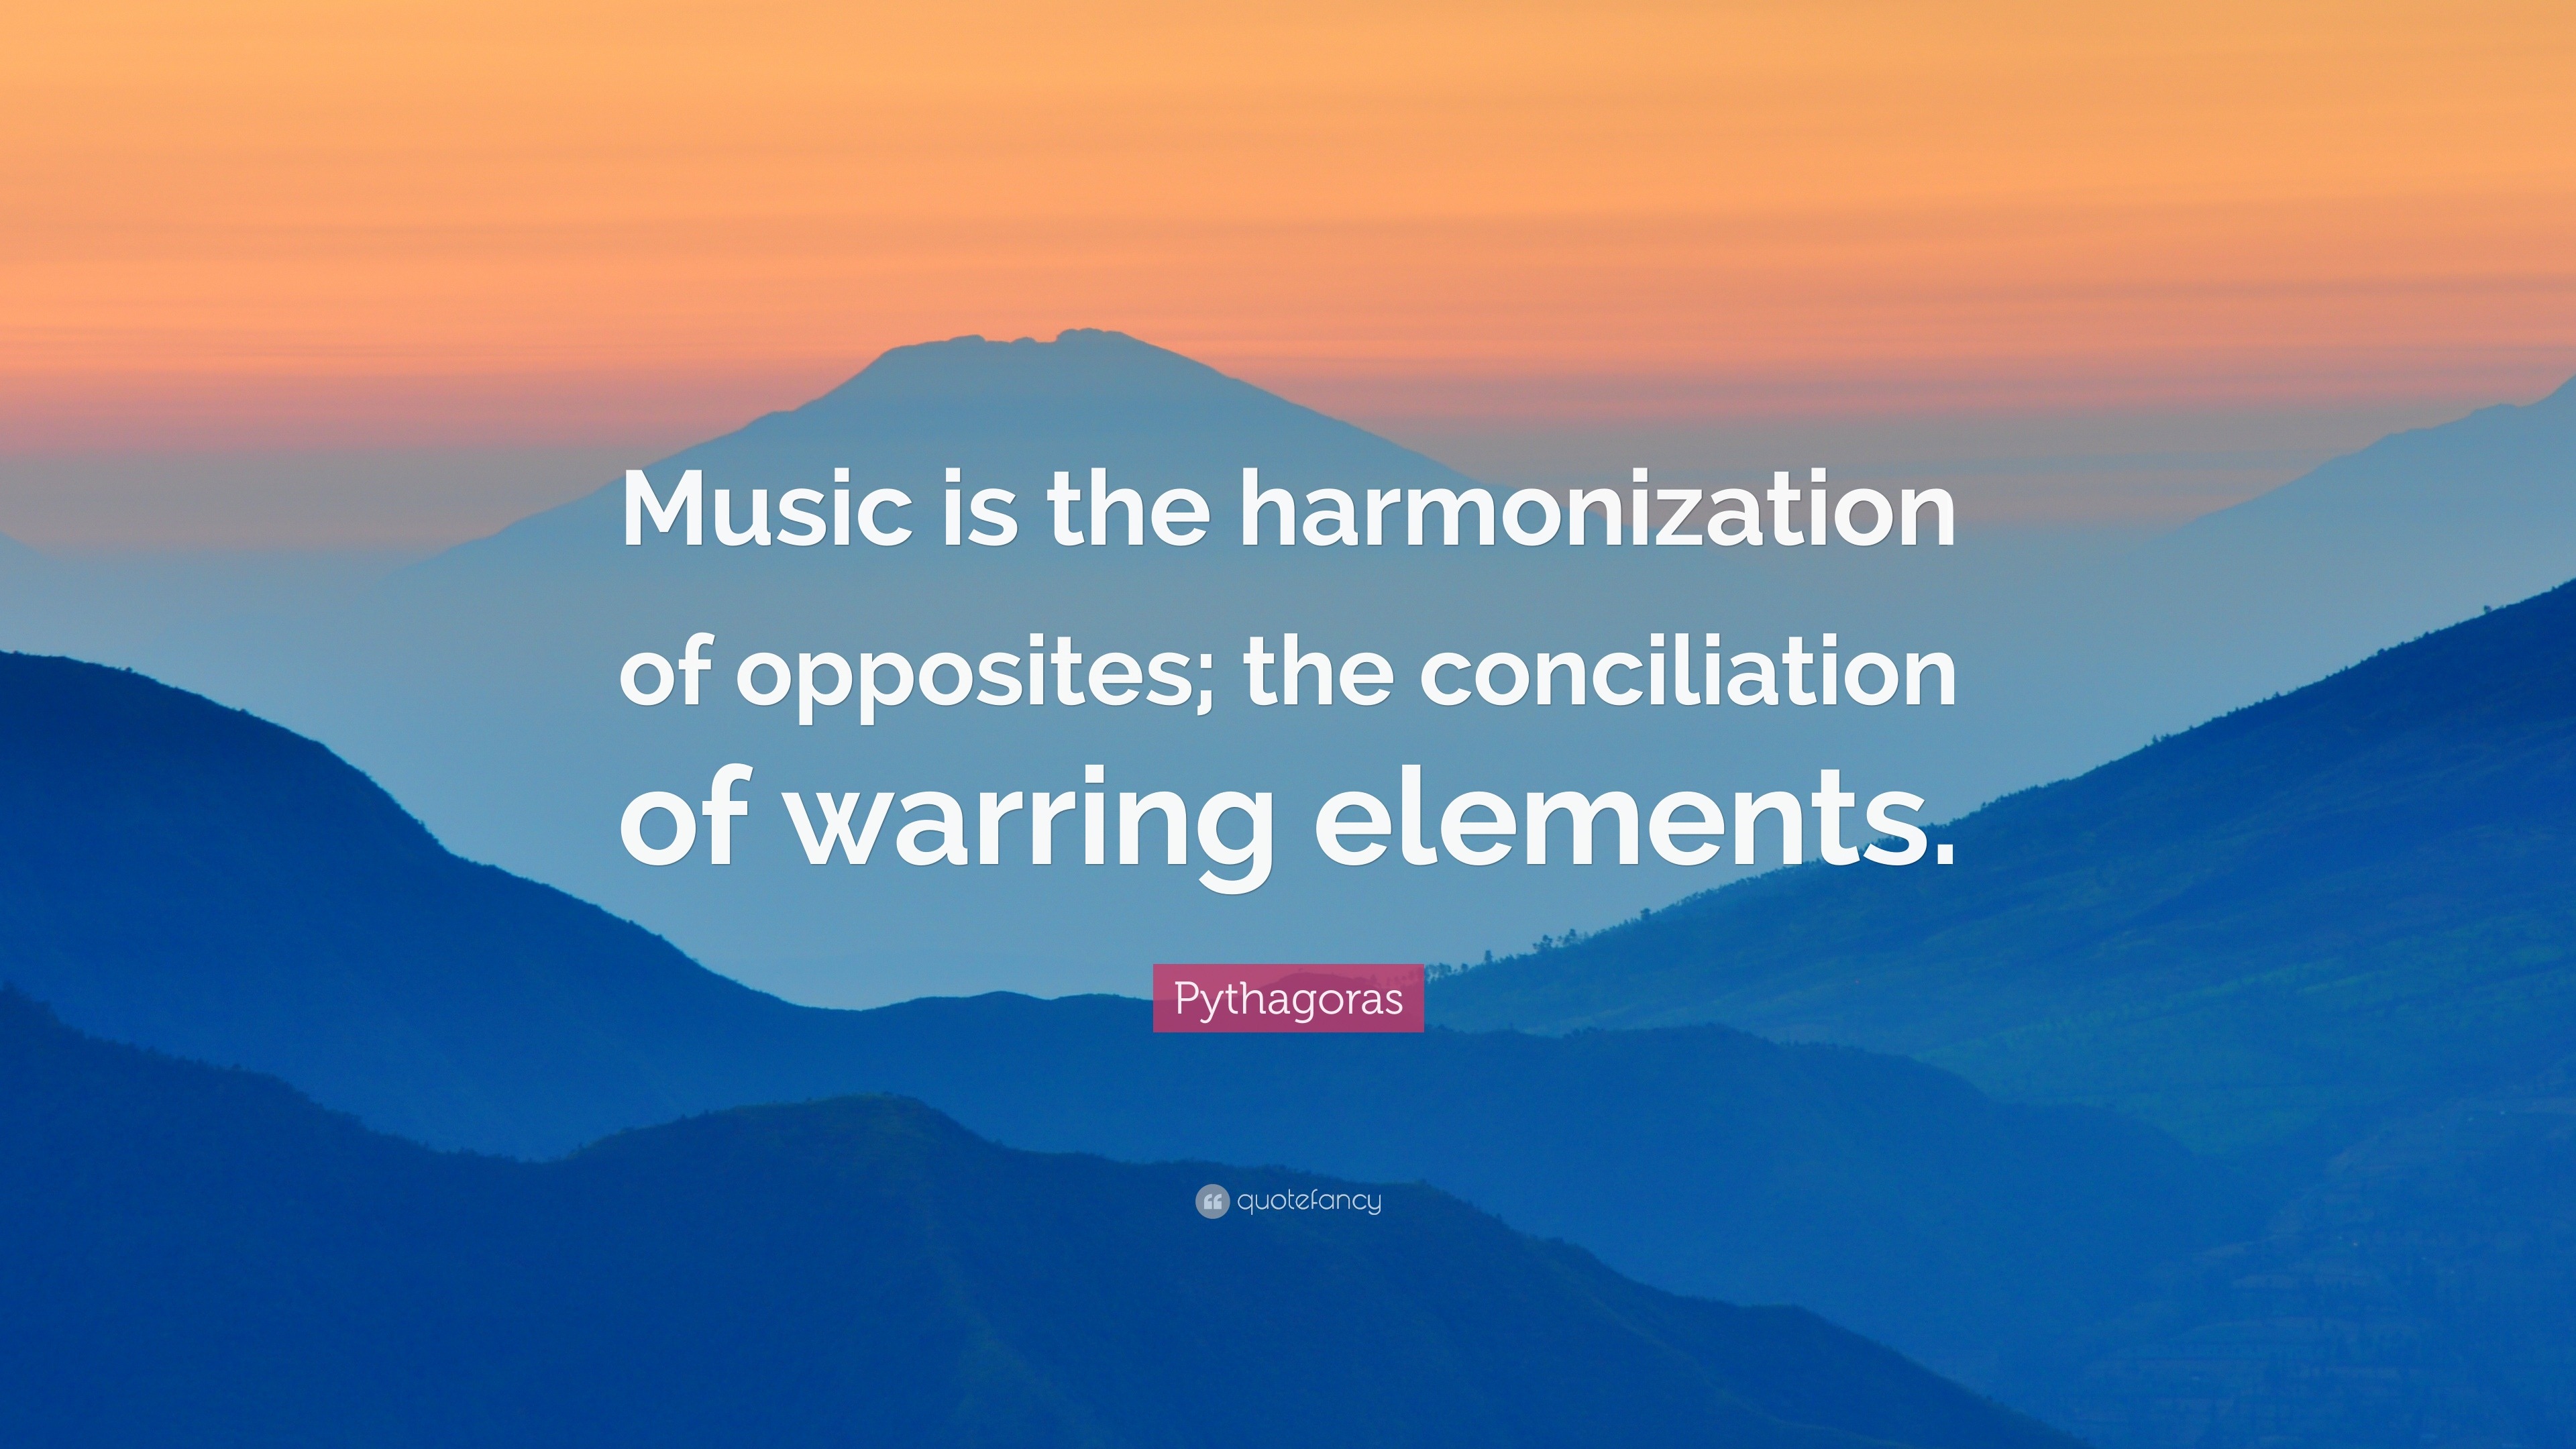 Pythagoras Quote: “Music is the harmonization of opposites; the ...